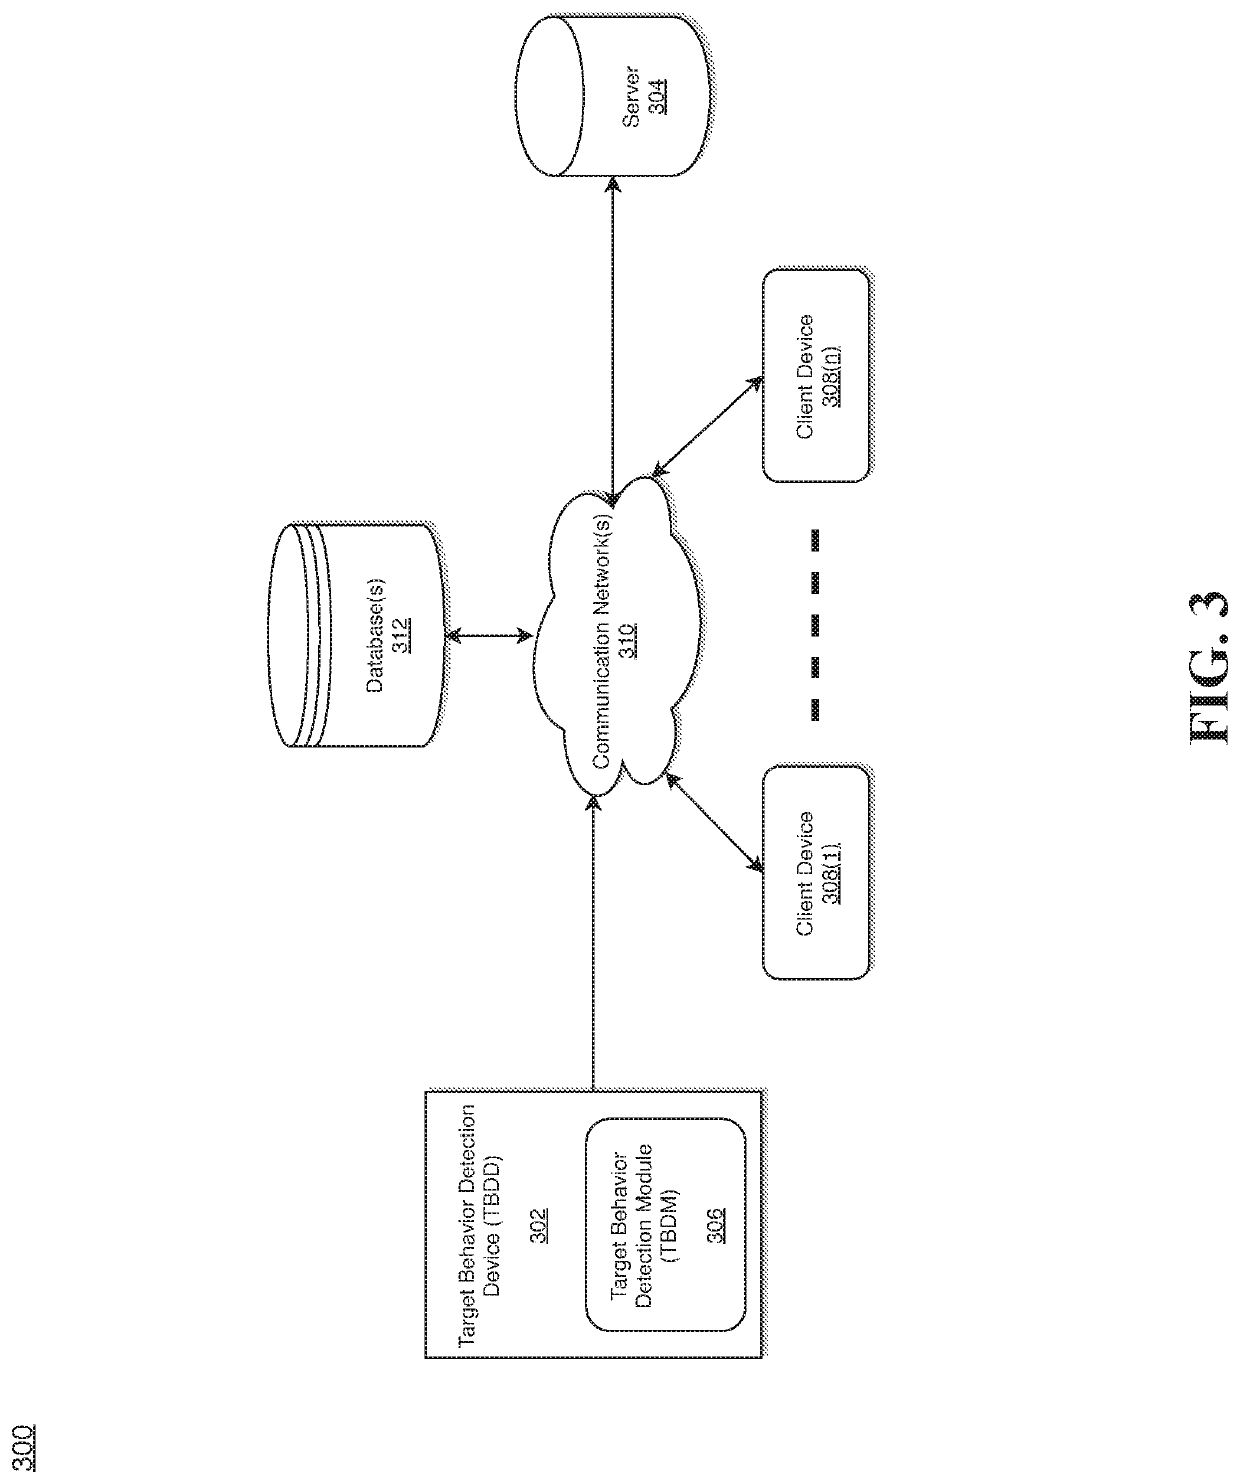 System and method for target behavior discovery and detection